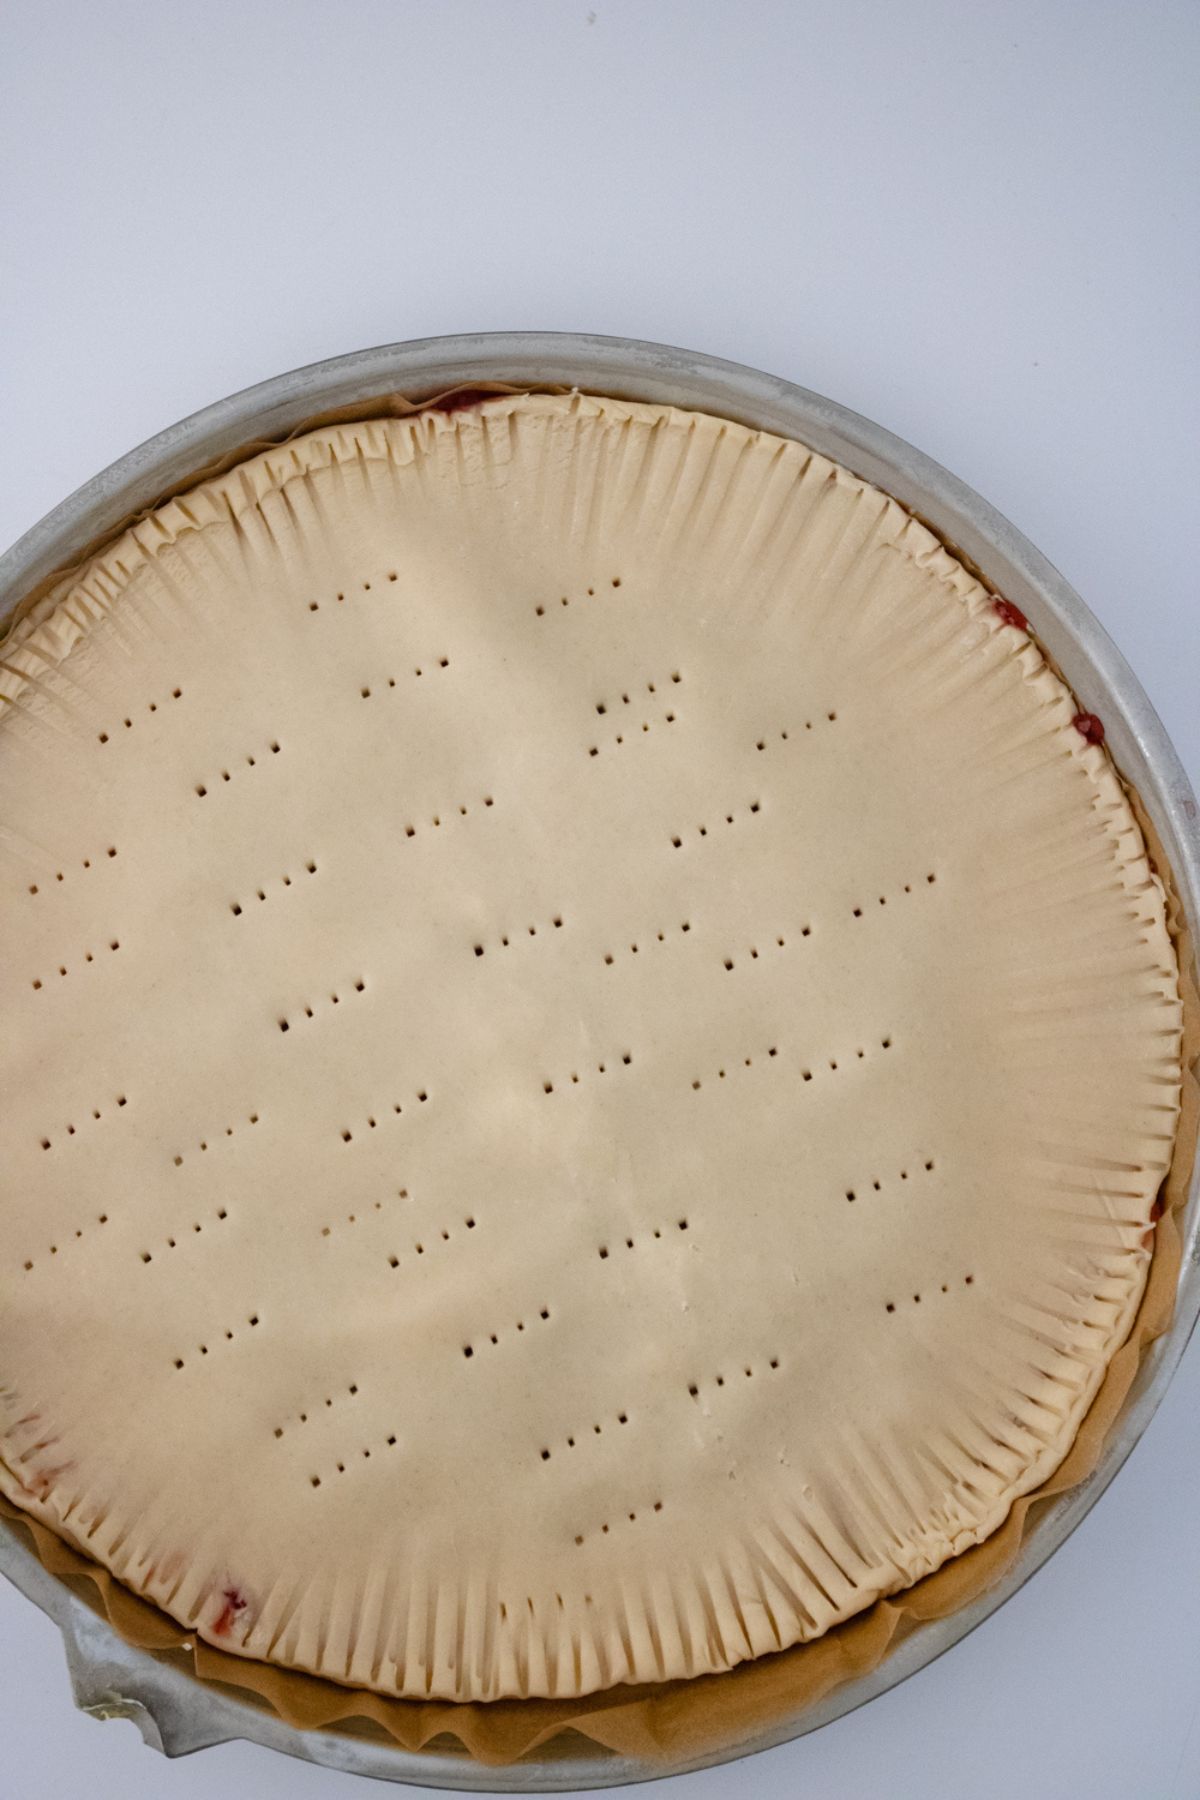 A pie crust with holes poked in the top.